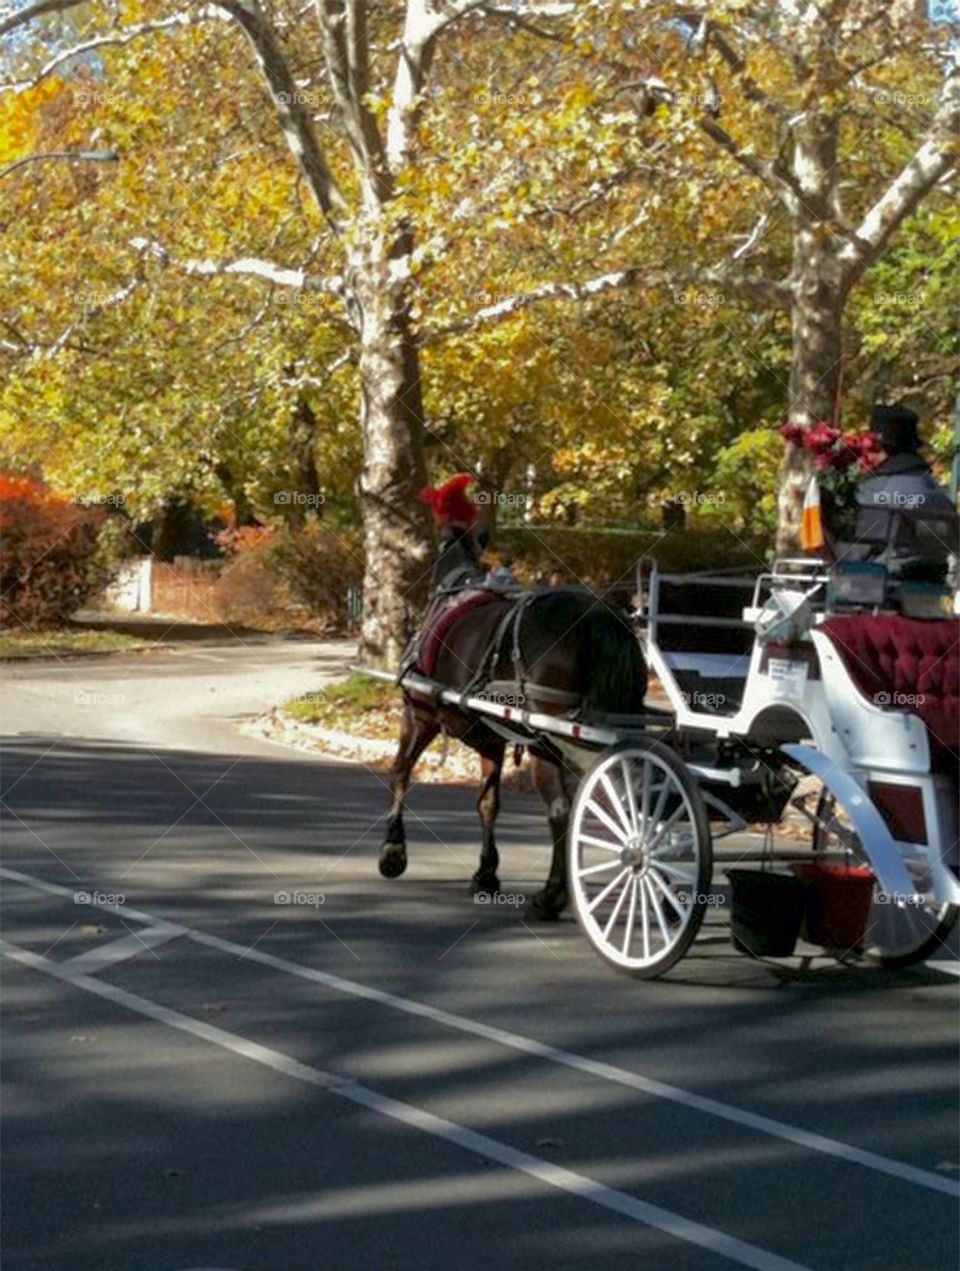 Horse and carriage ride . Photo was taken in the Central Park New York 